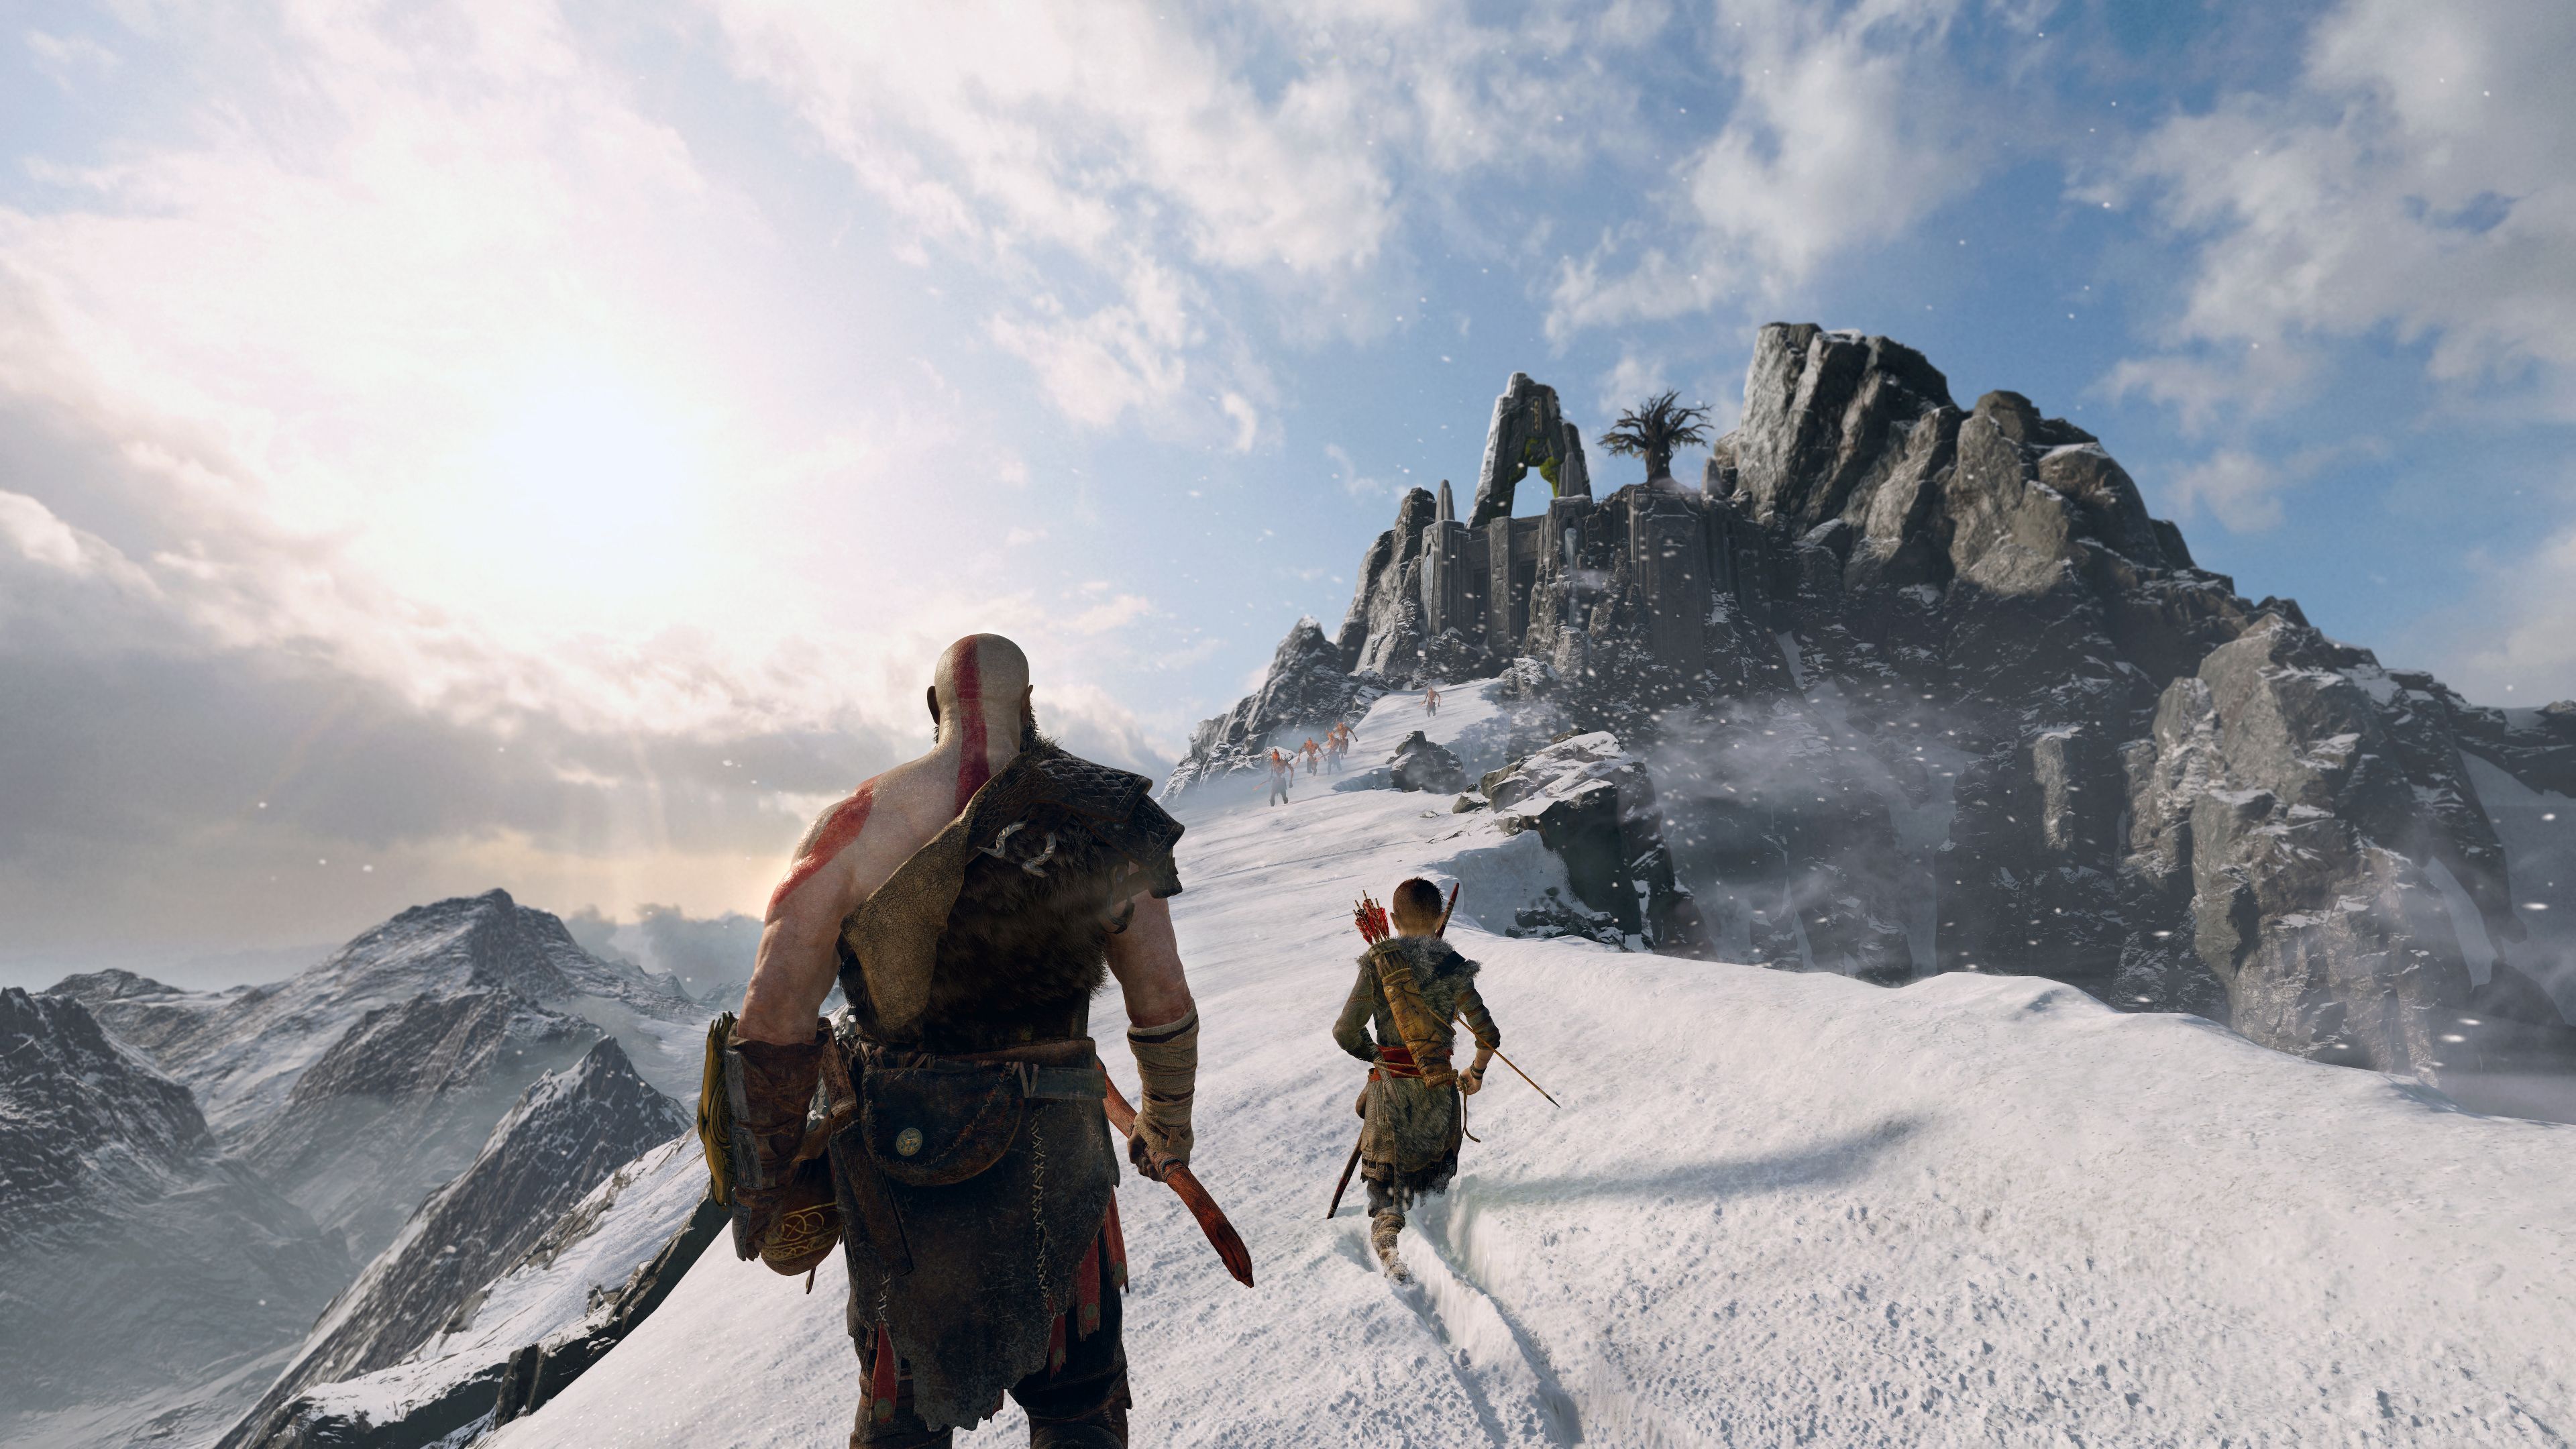 Gaming Analyst Predicts That God of War PS4 Could Sell Around 10 Million Copies